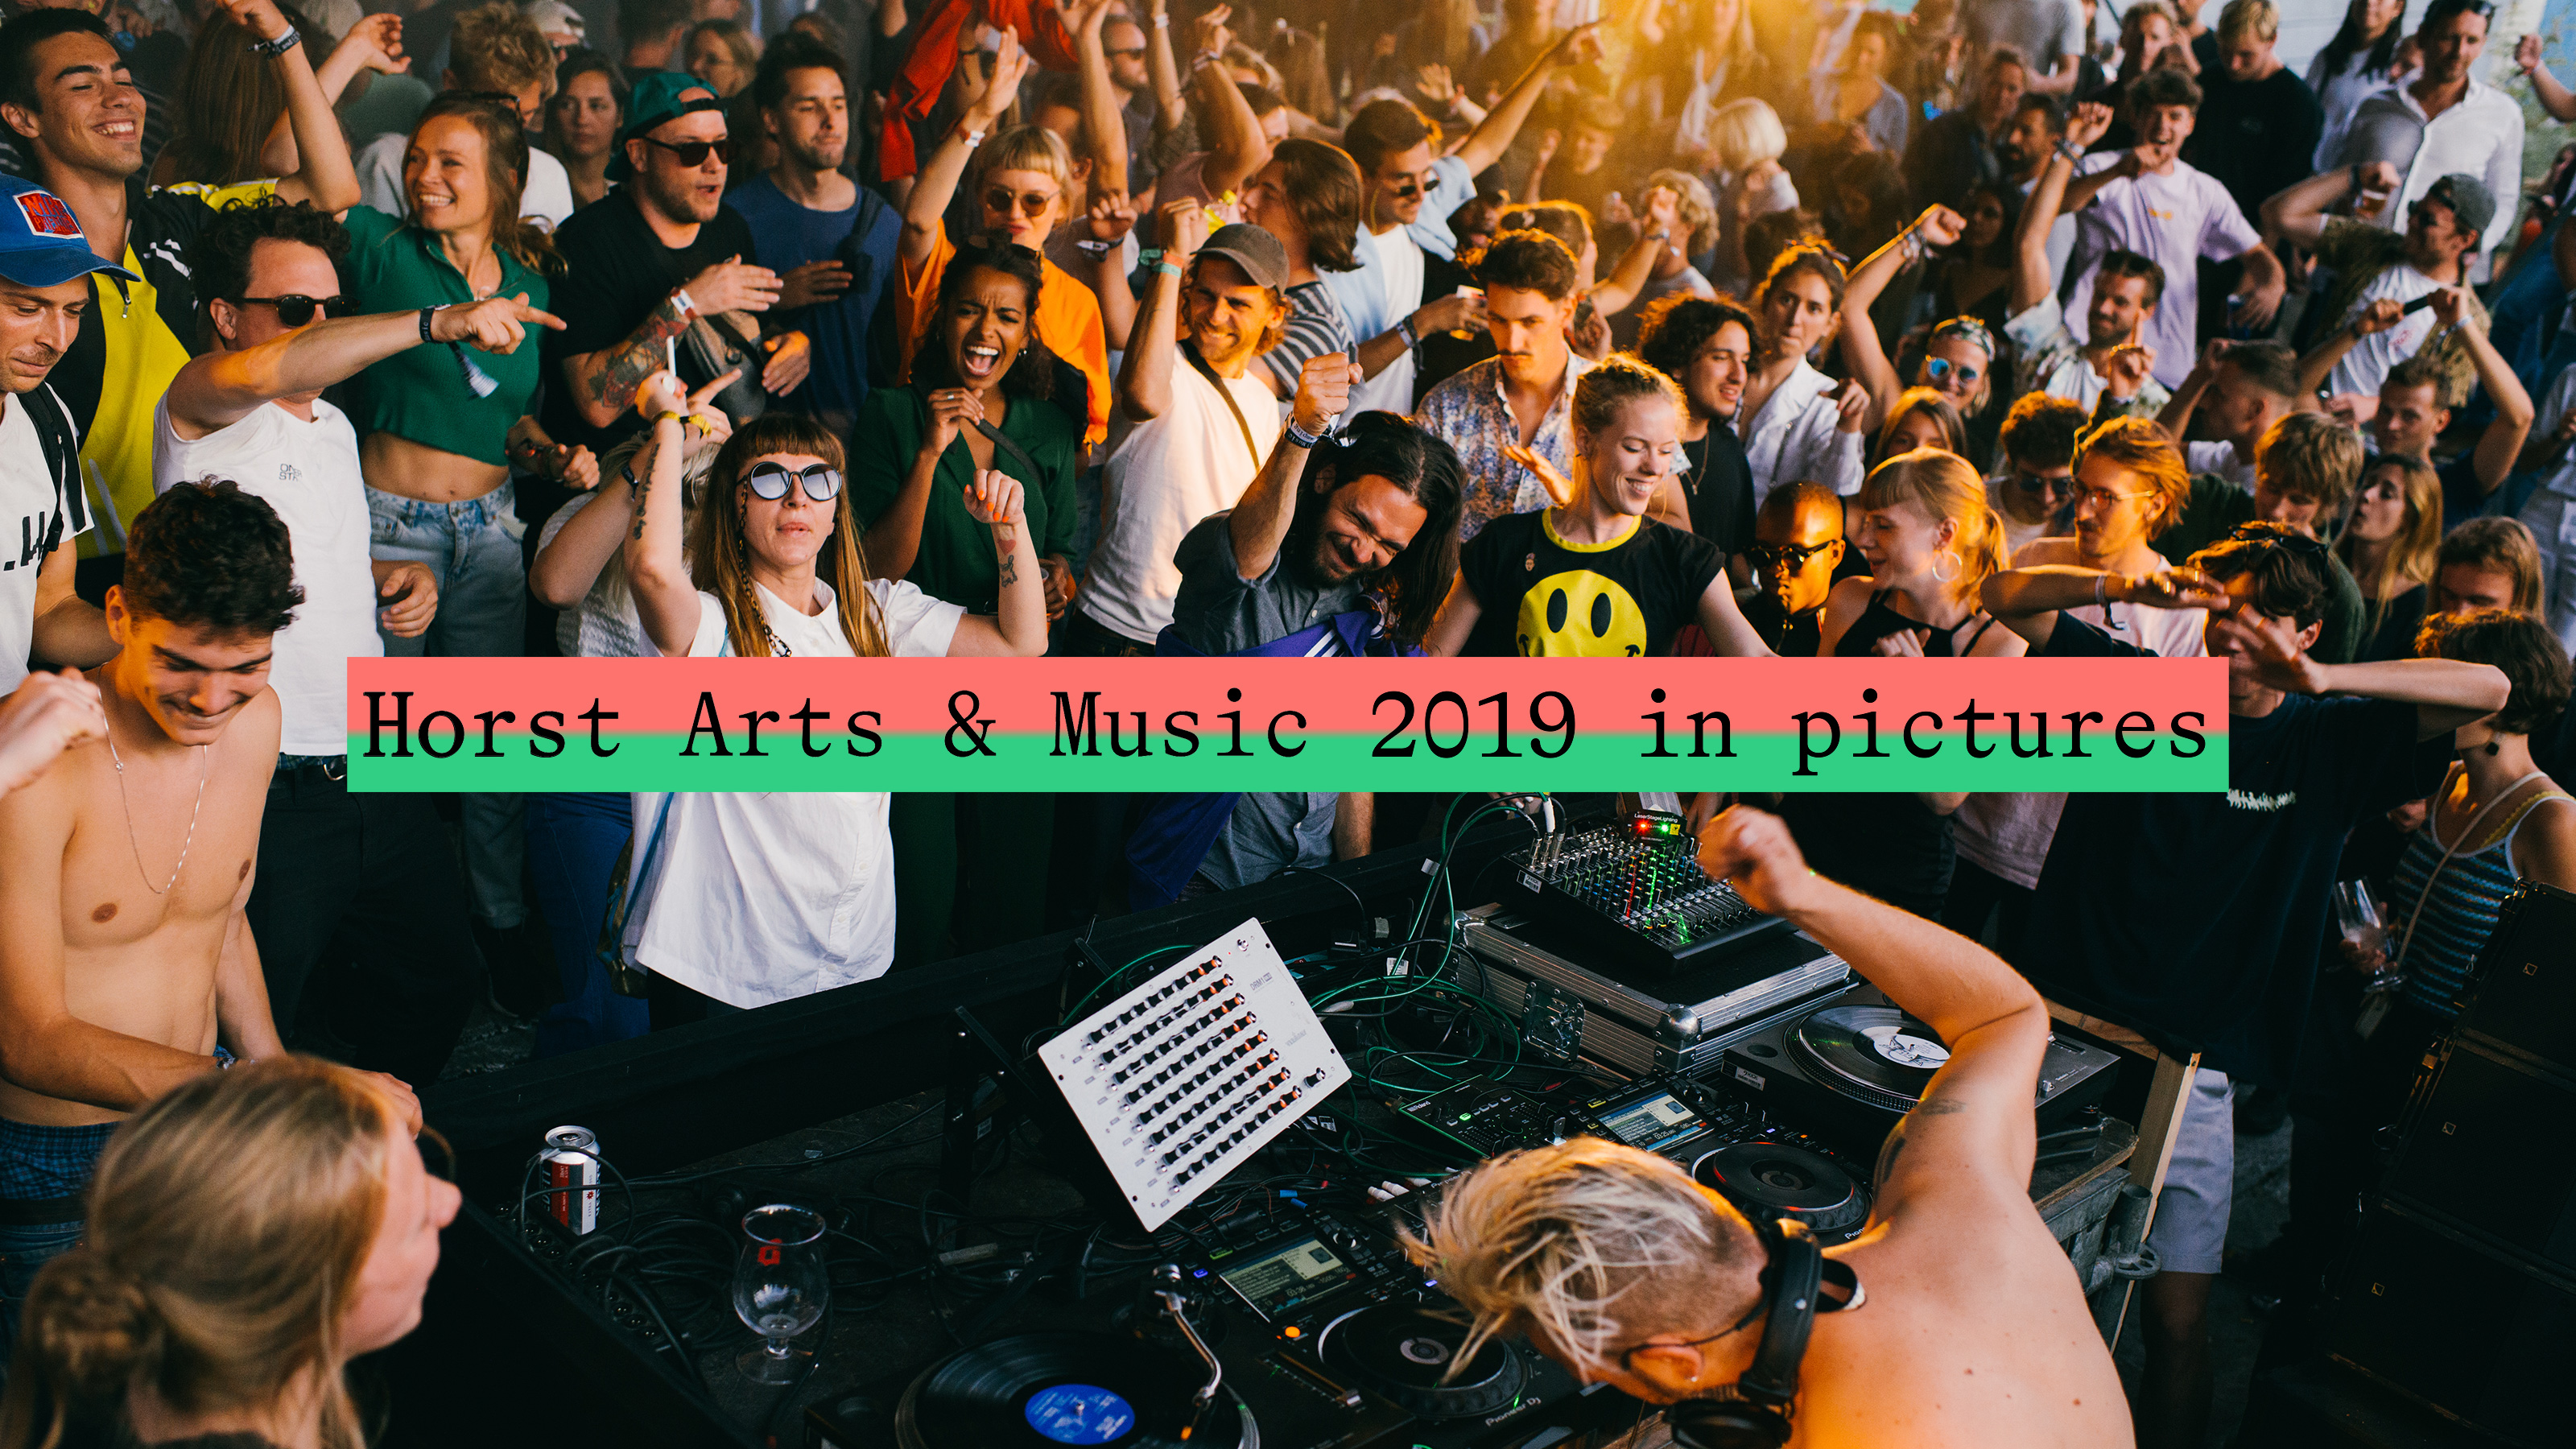 Horst Arts & Music 2019 in pictures